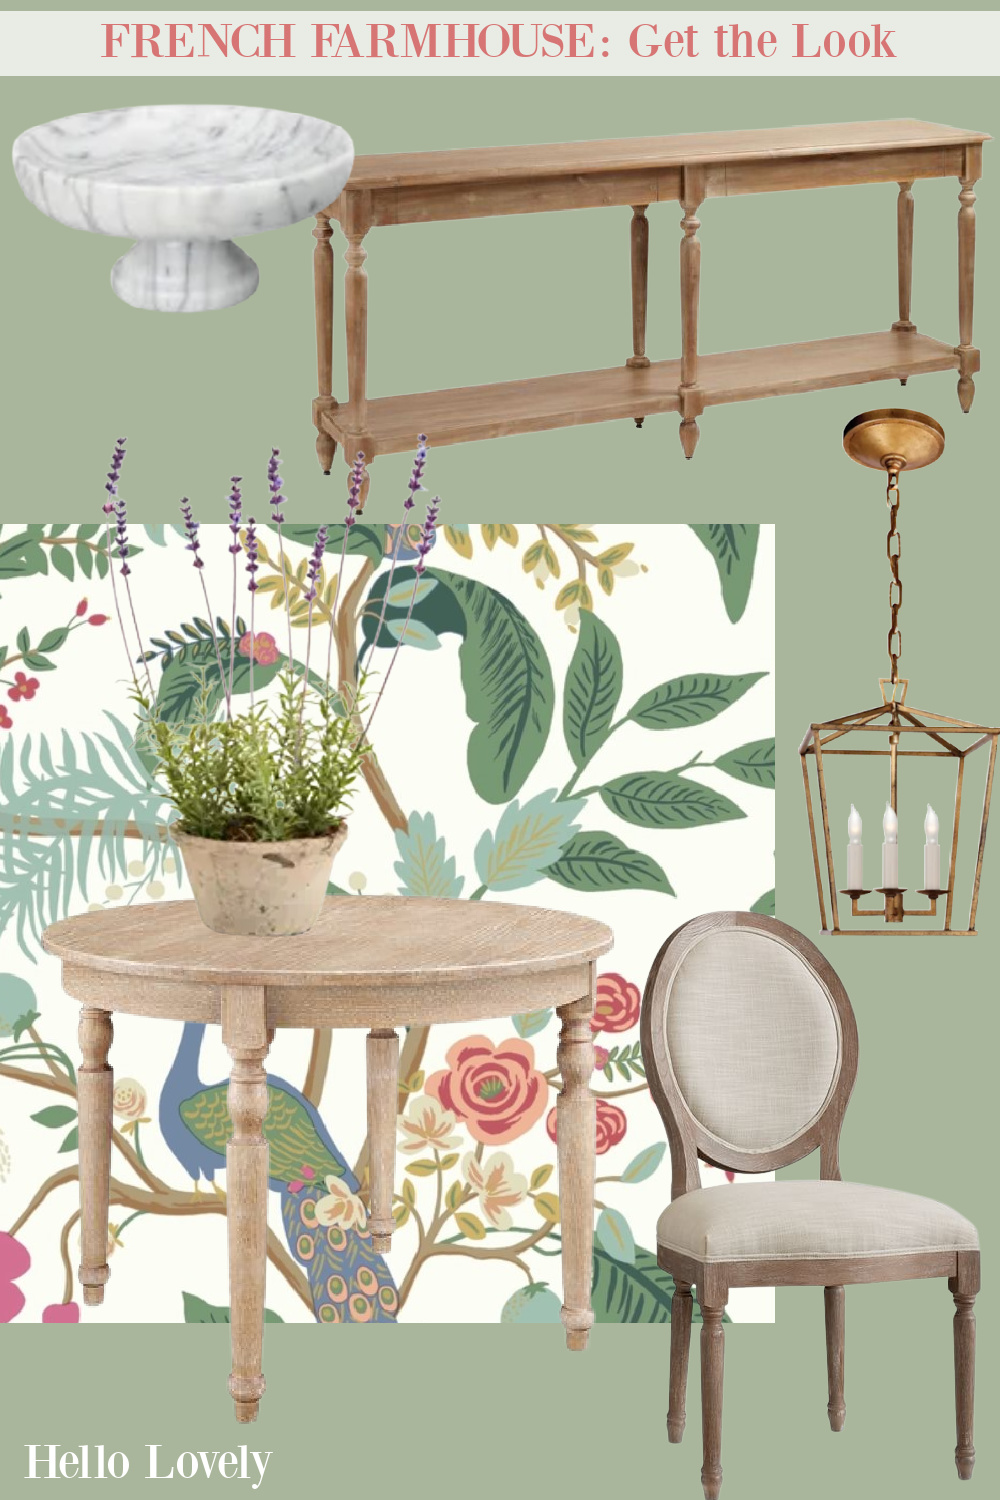 French Farmhouse: Get the Look - furniture, lighting, and accessories for a romantic look. #frenchfarmhouse